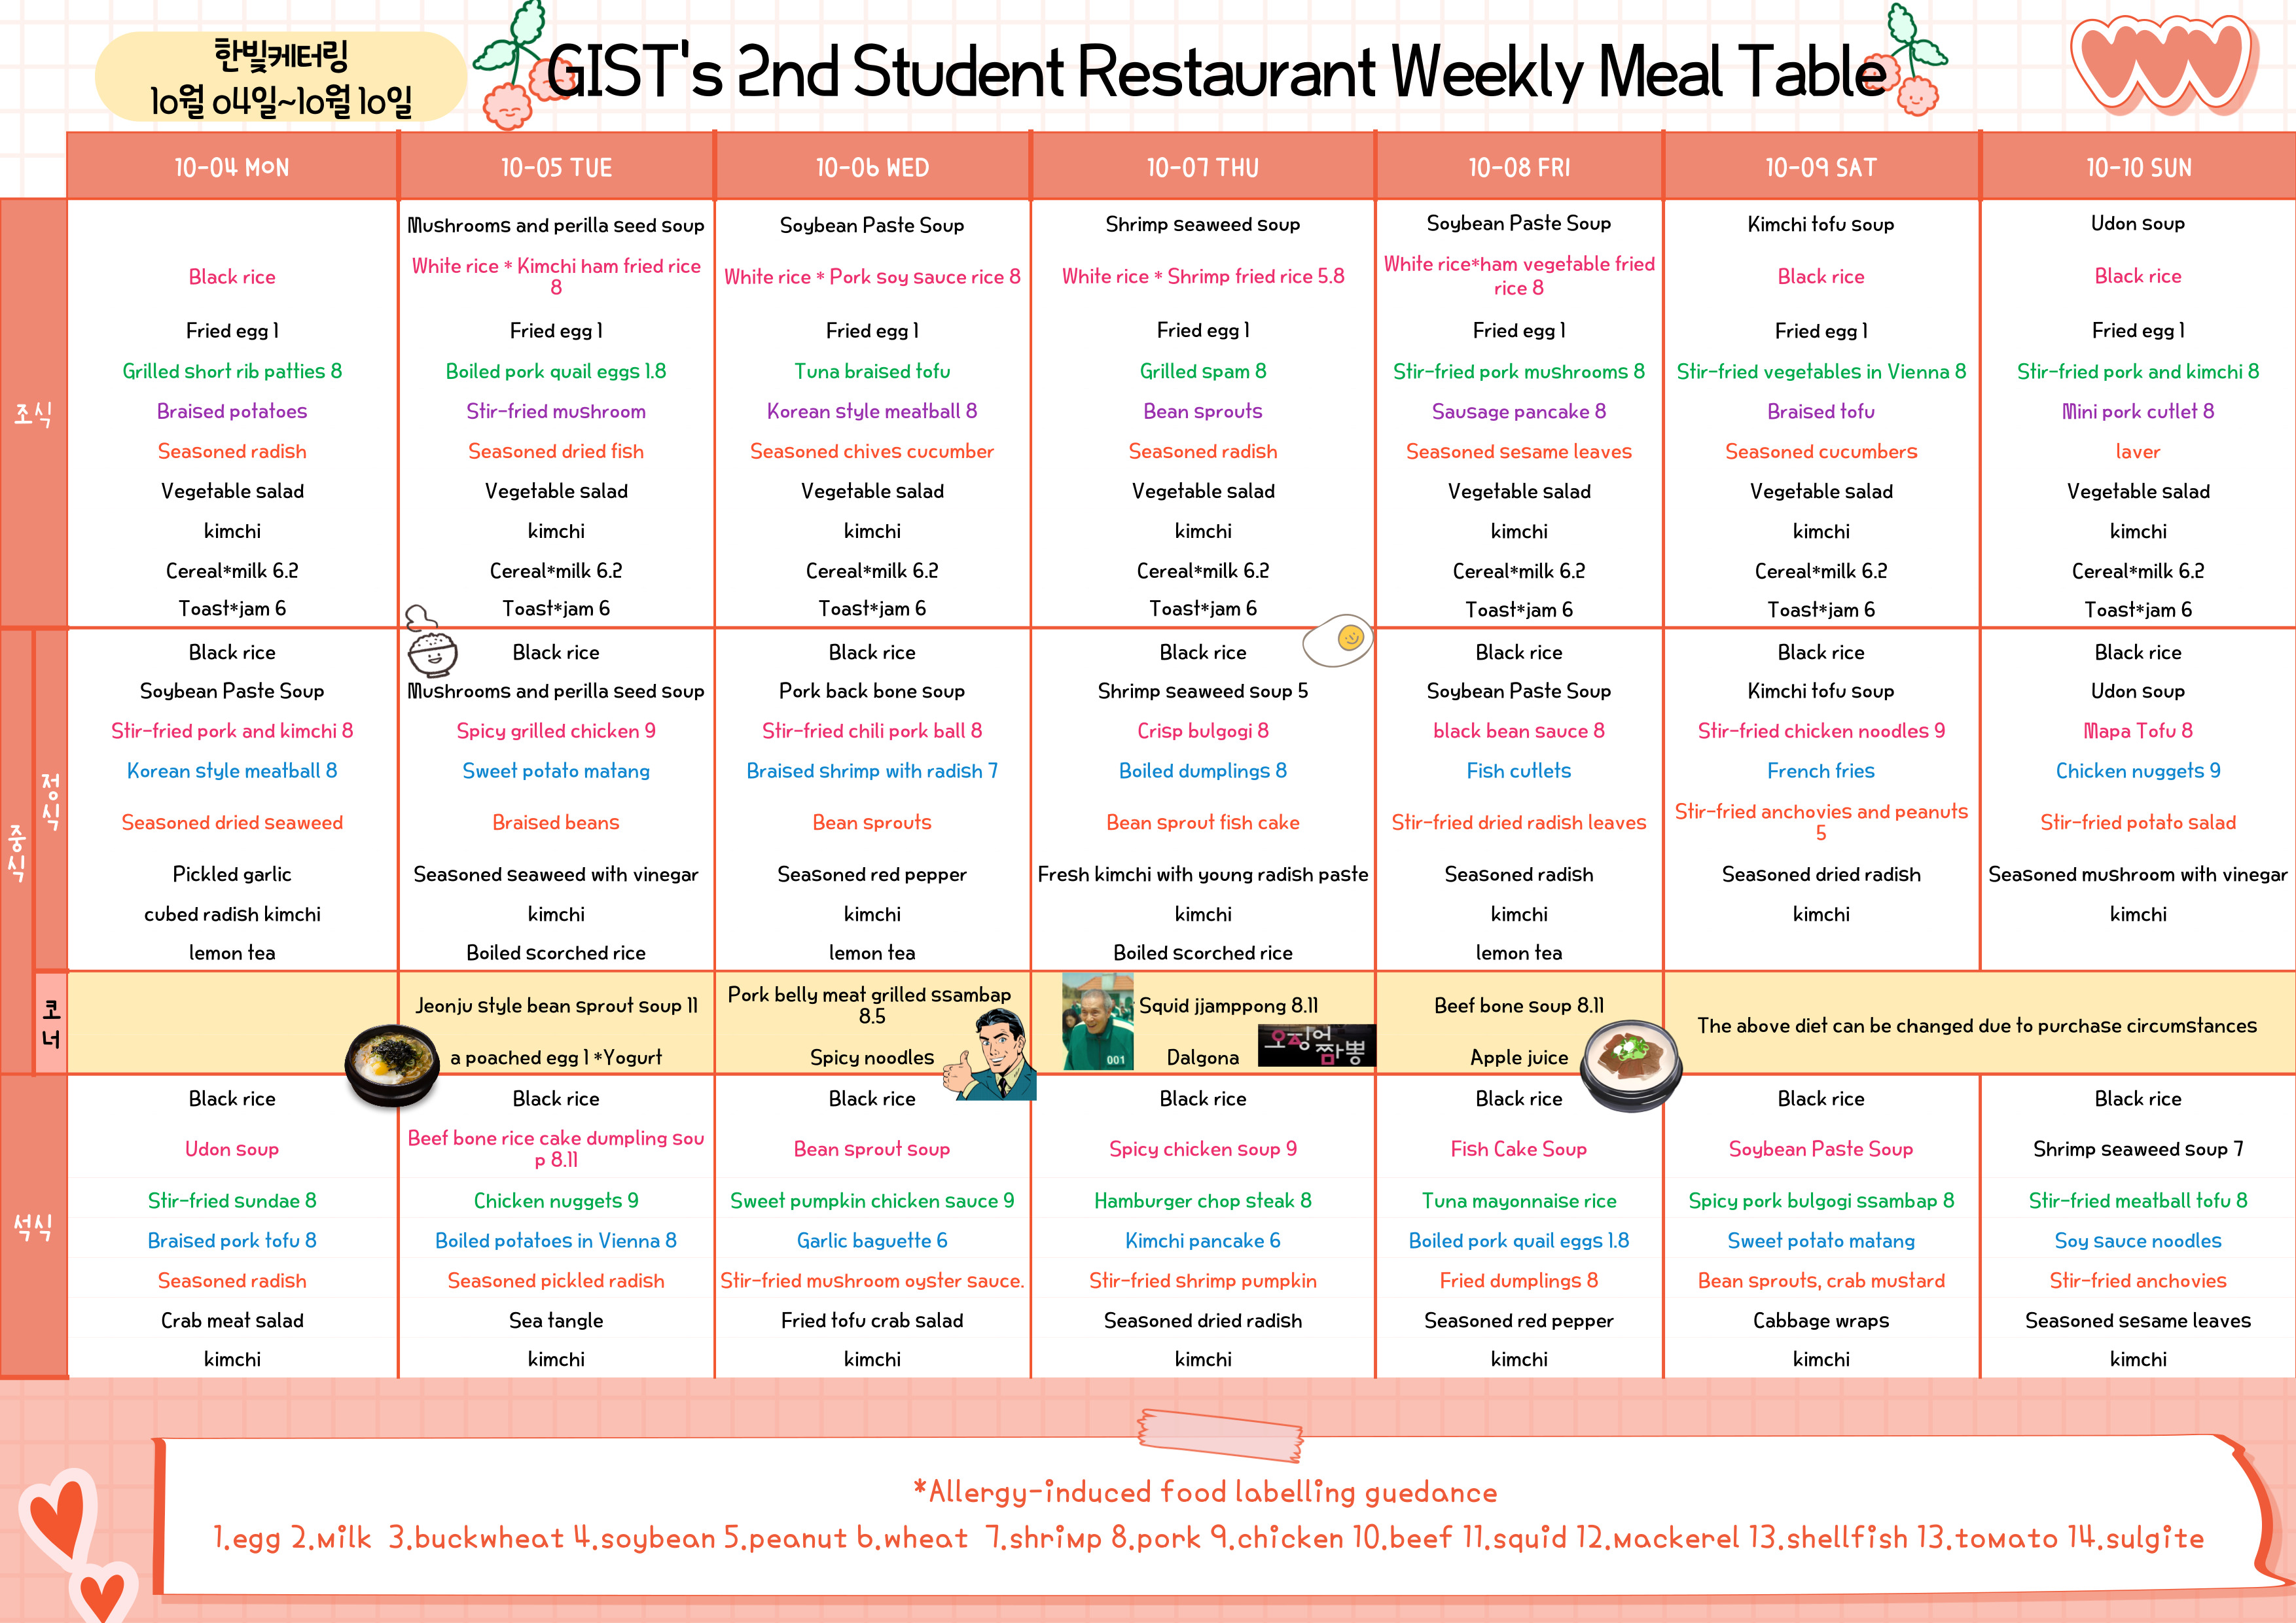 The 2nd Student Restaurant Weekly Meal Table (2021.10.04-2021.10.10) 이미지